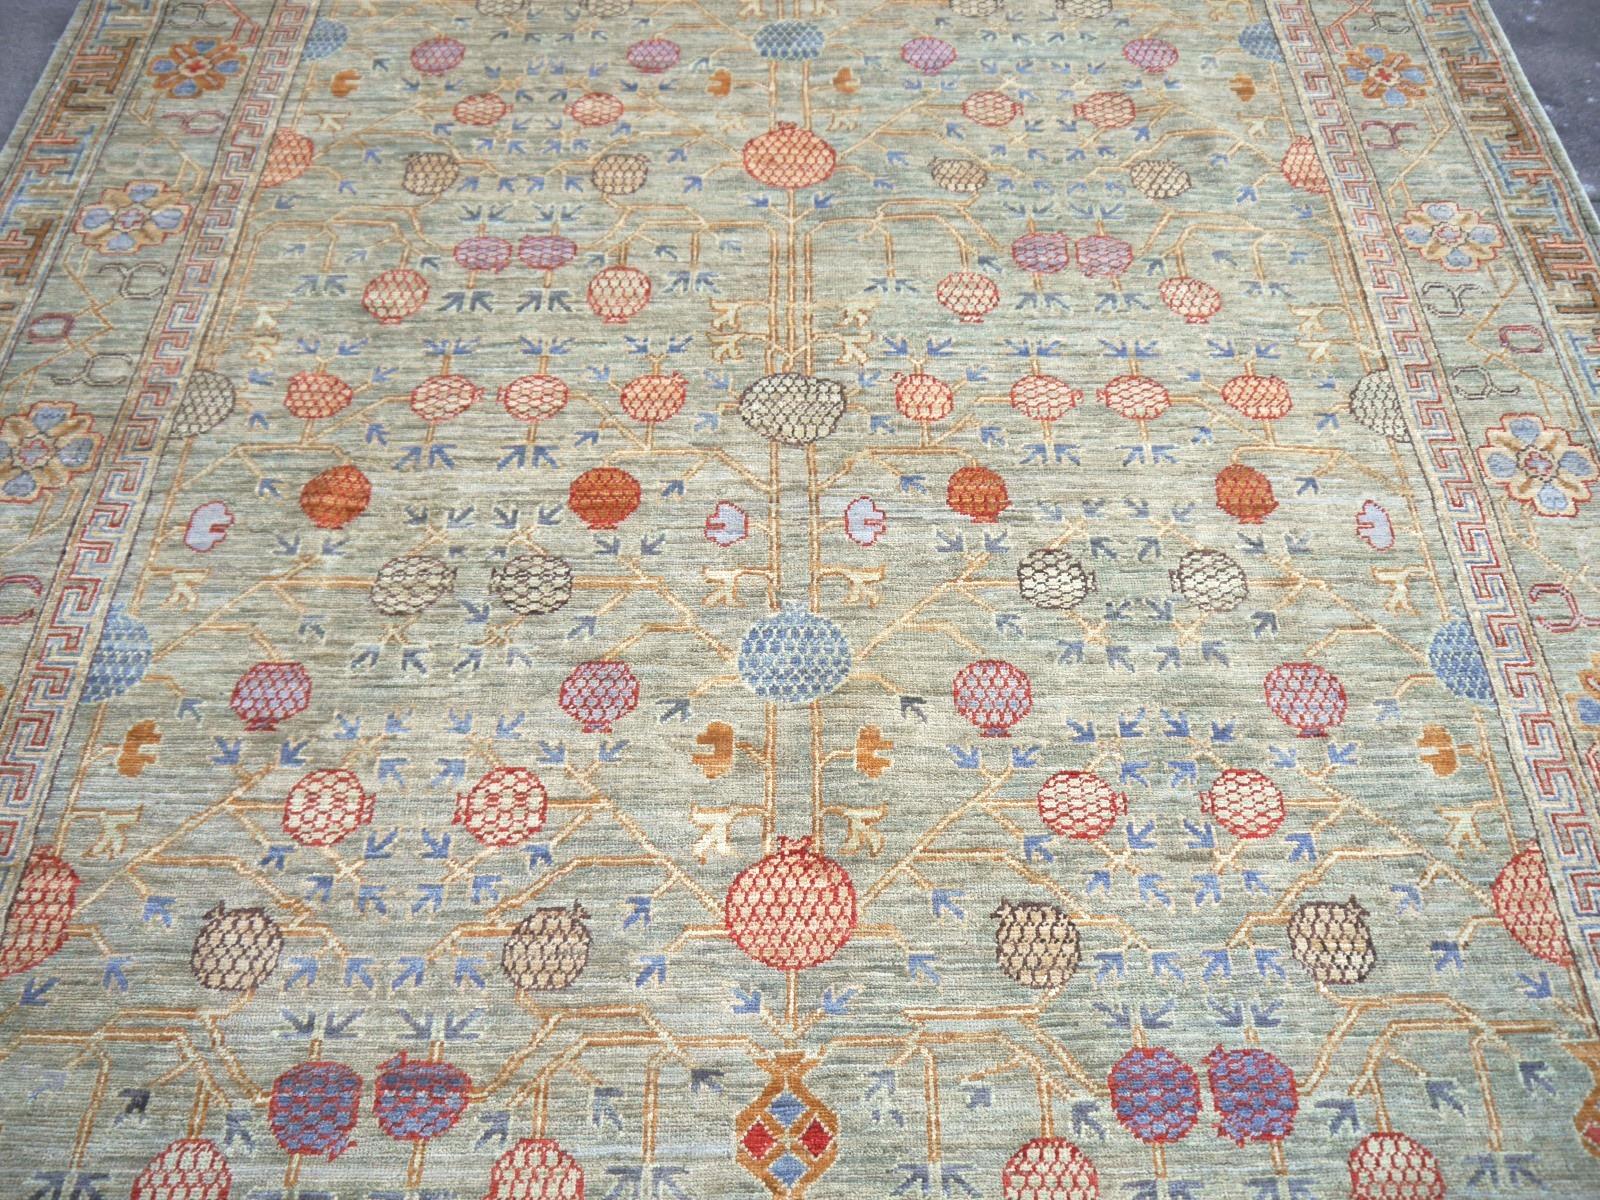 Khotan Style Rug Hand Knotted Pomegranate Tree Contemporary Wool Area Carpet 2